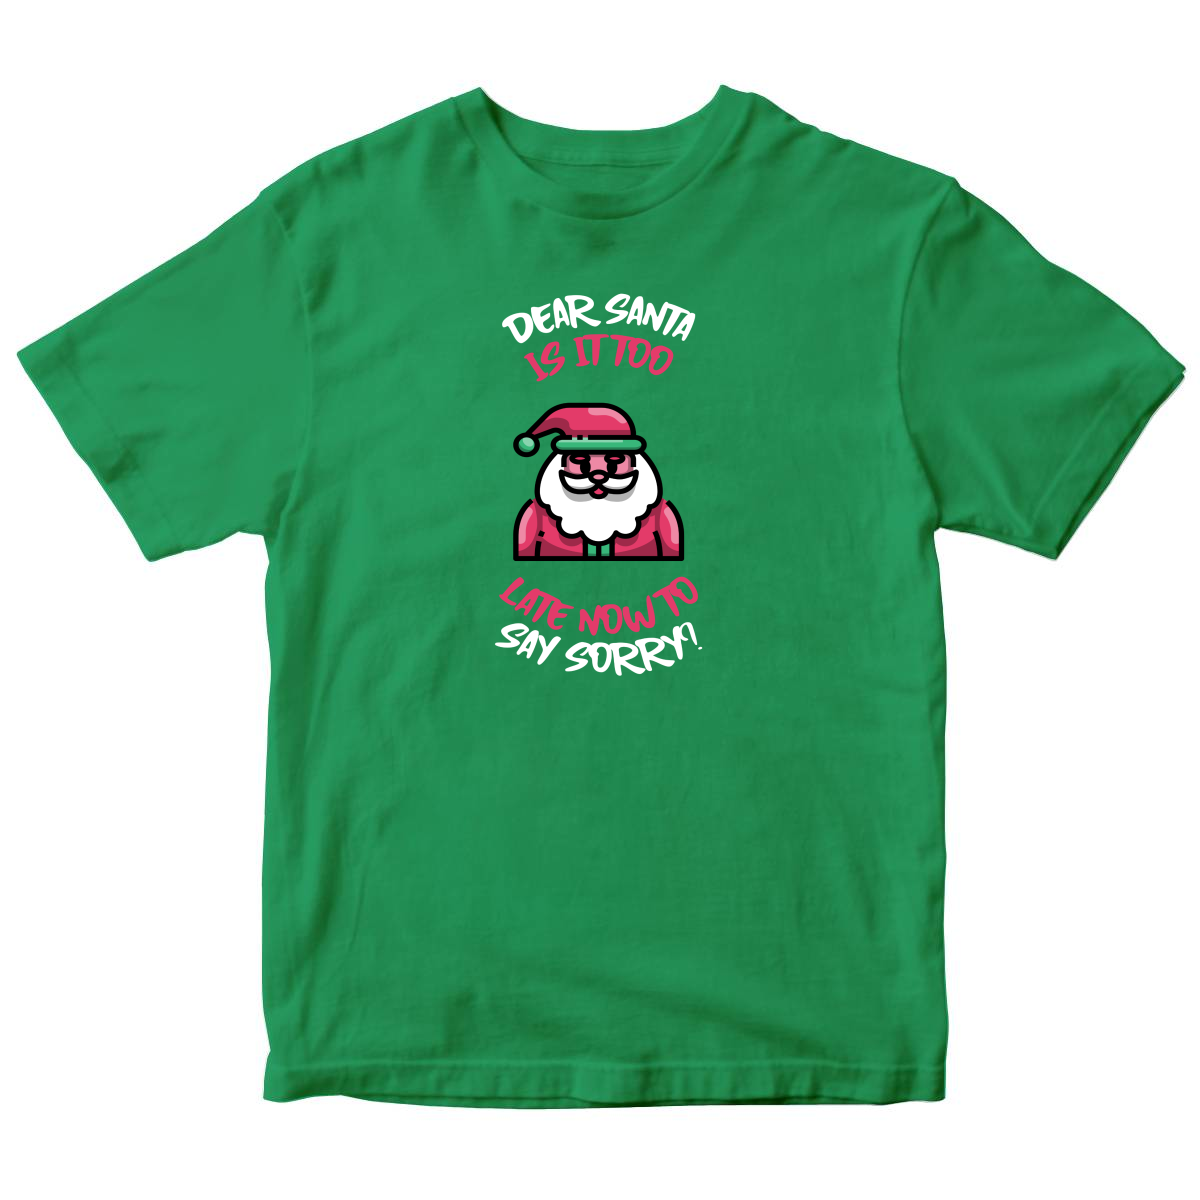 Dear Santa, Is It Too Late to Say Sorry? Kids T-shirt | Green